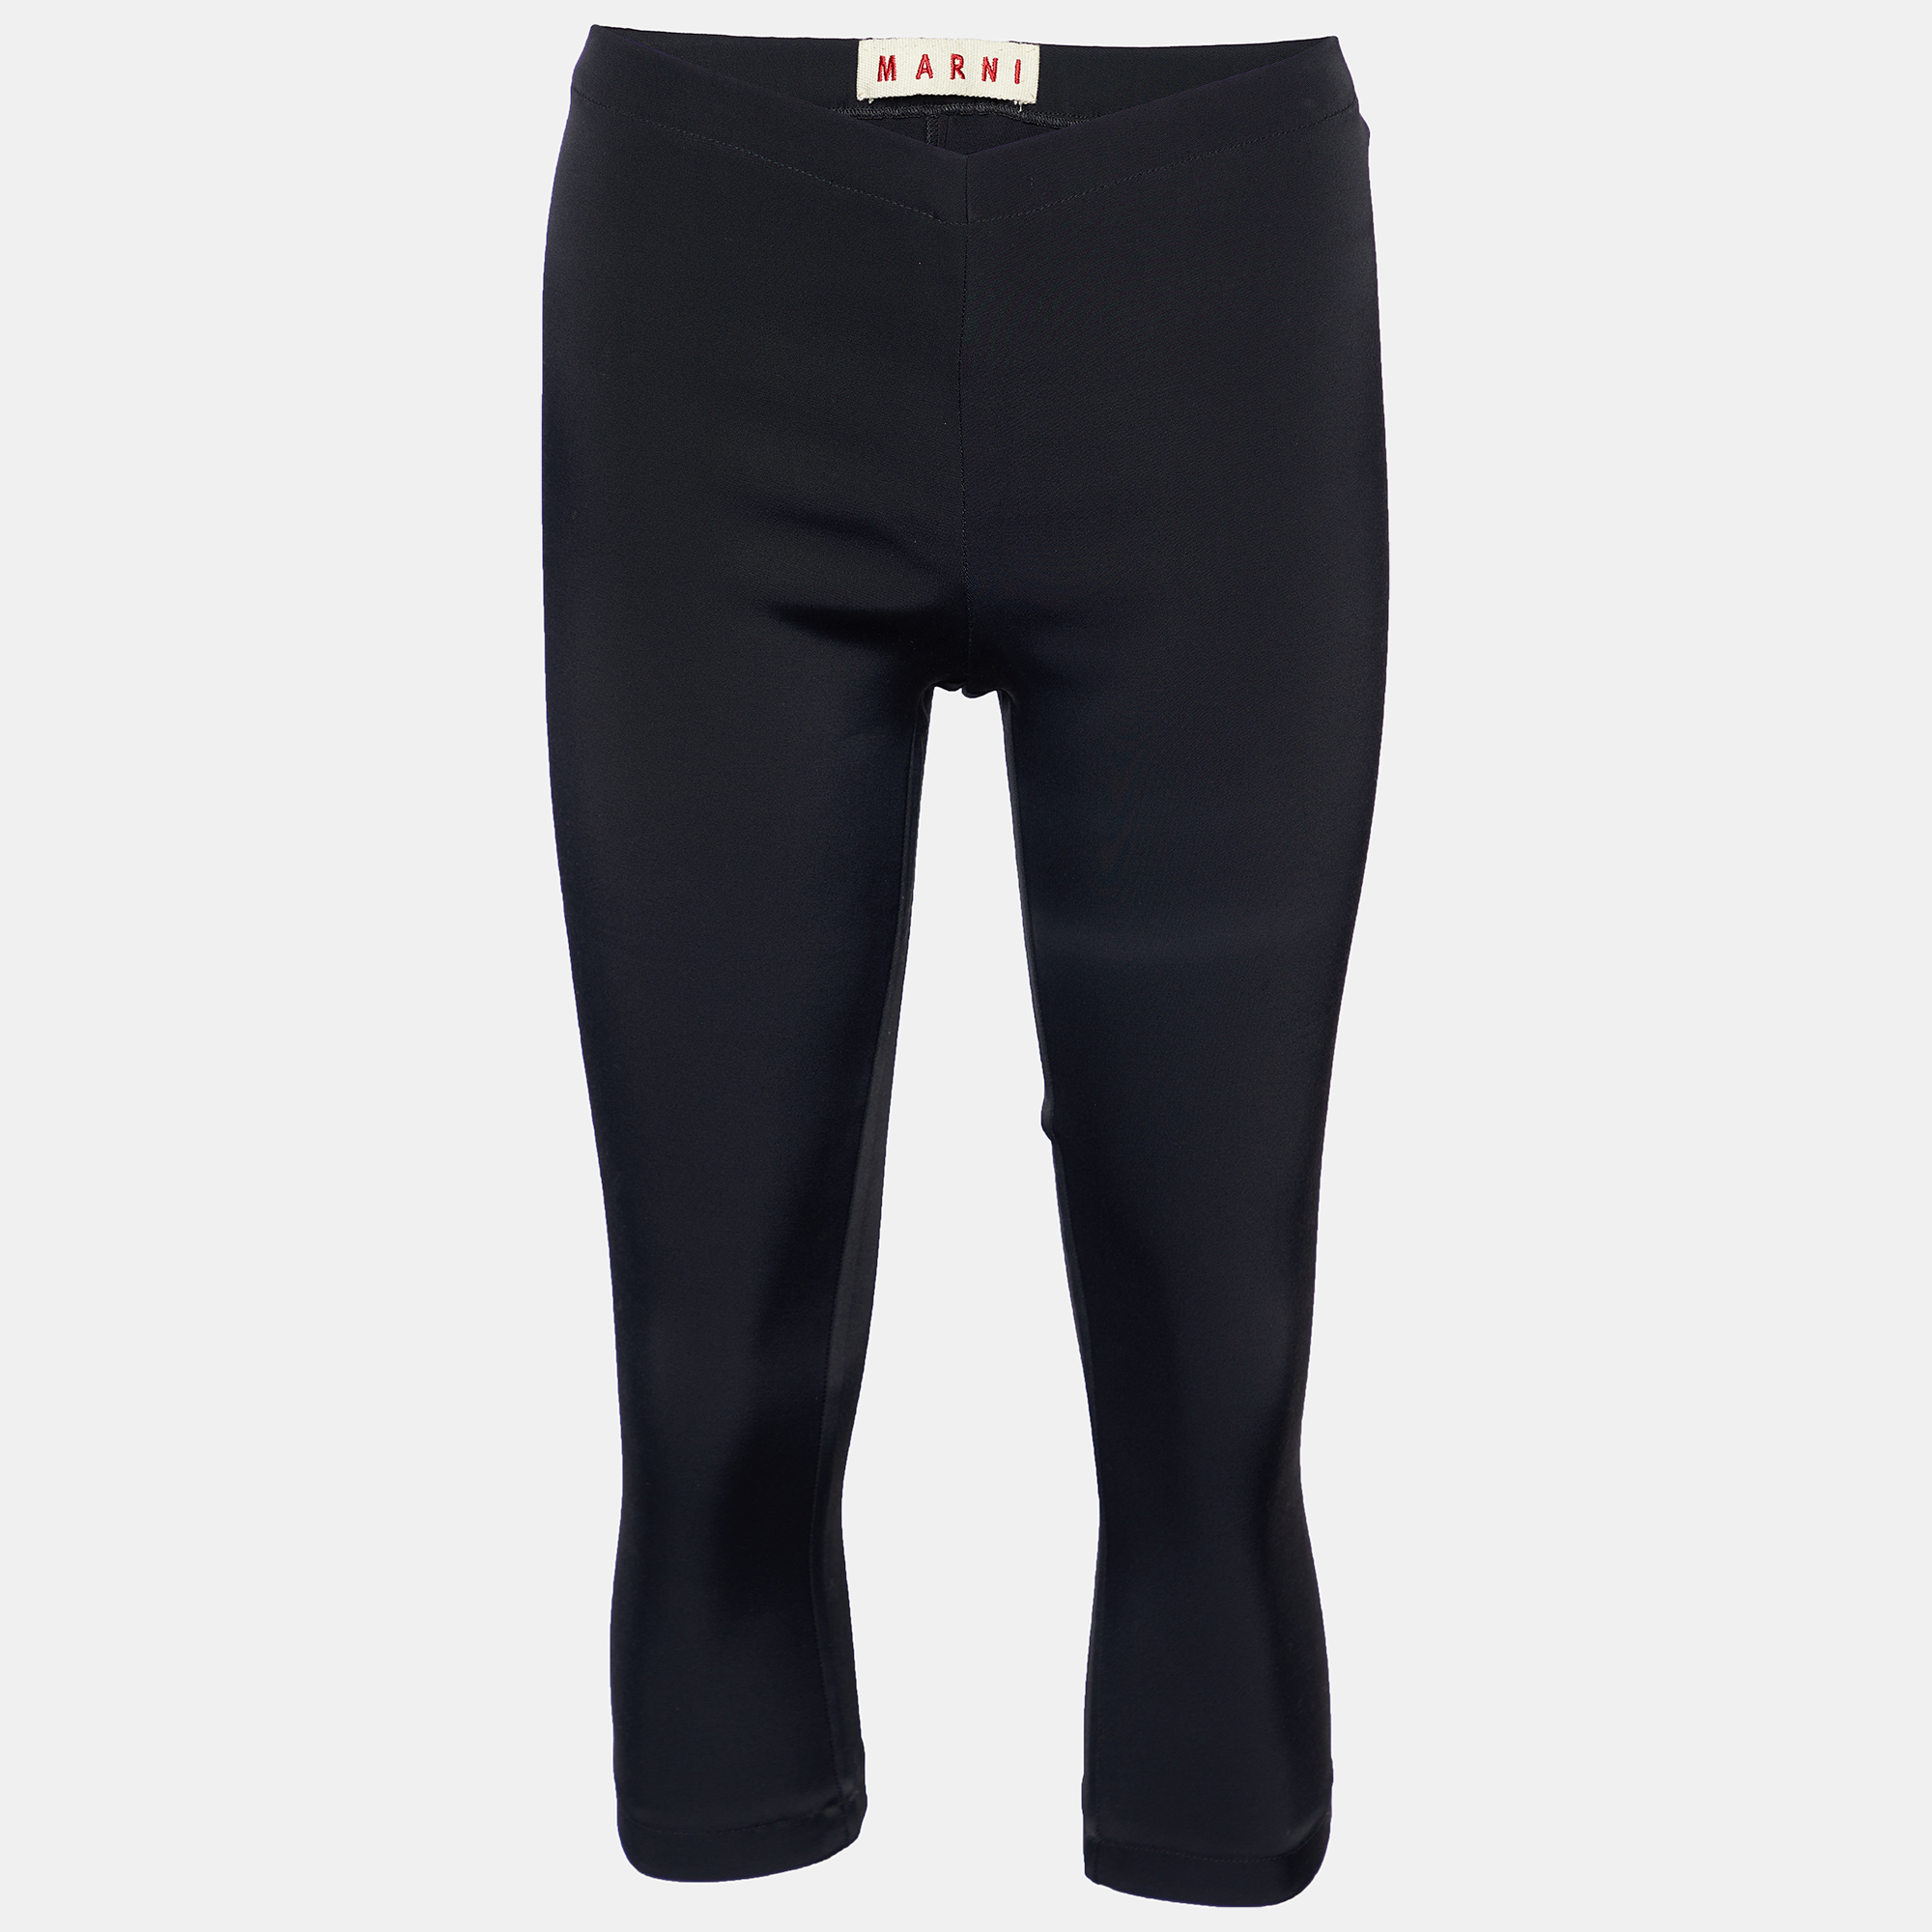 Pre-owned Marni Black Knit Cropped Leggings S